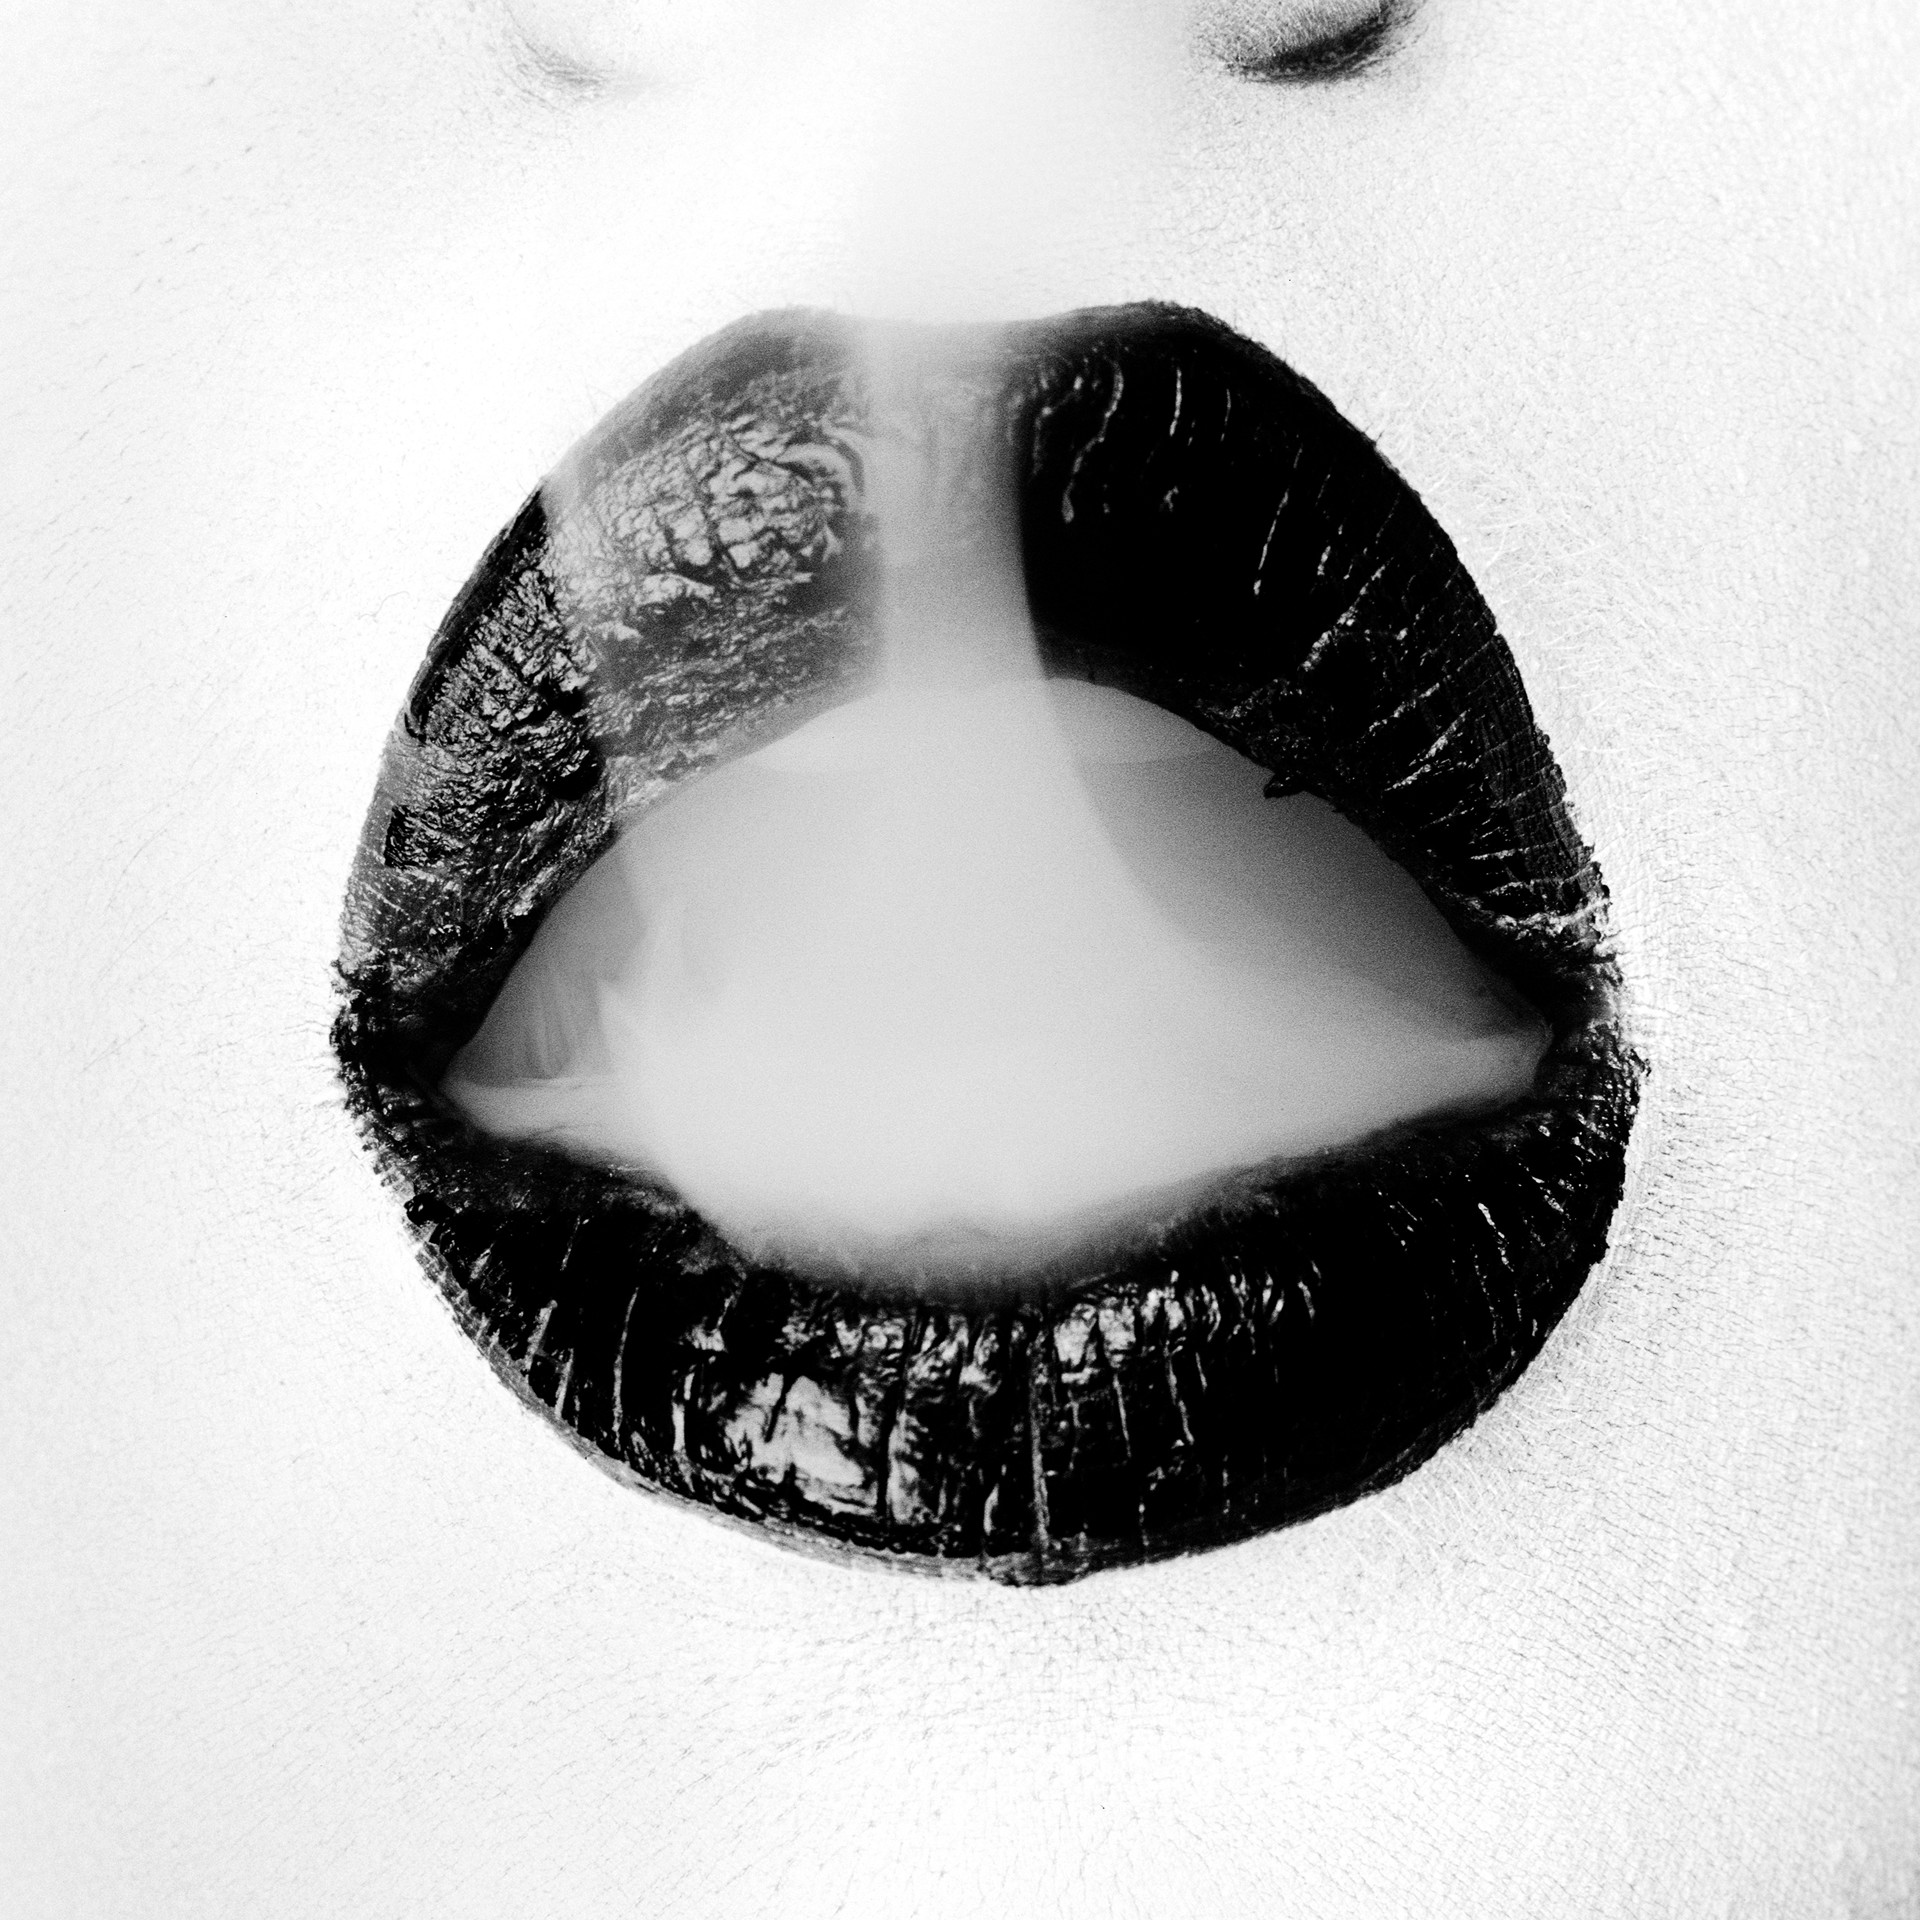 Exhale by Tyler Shields